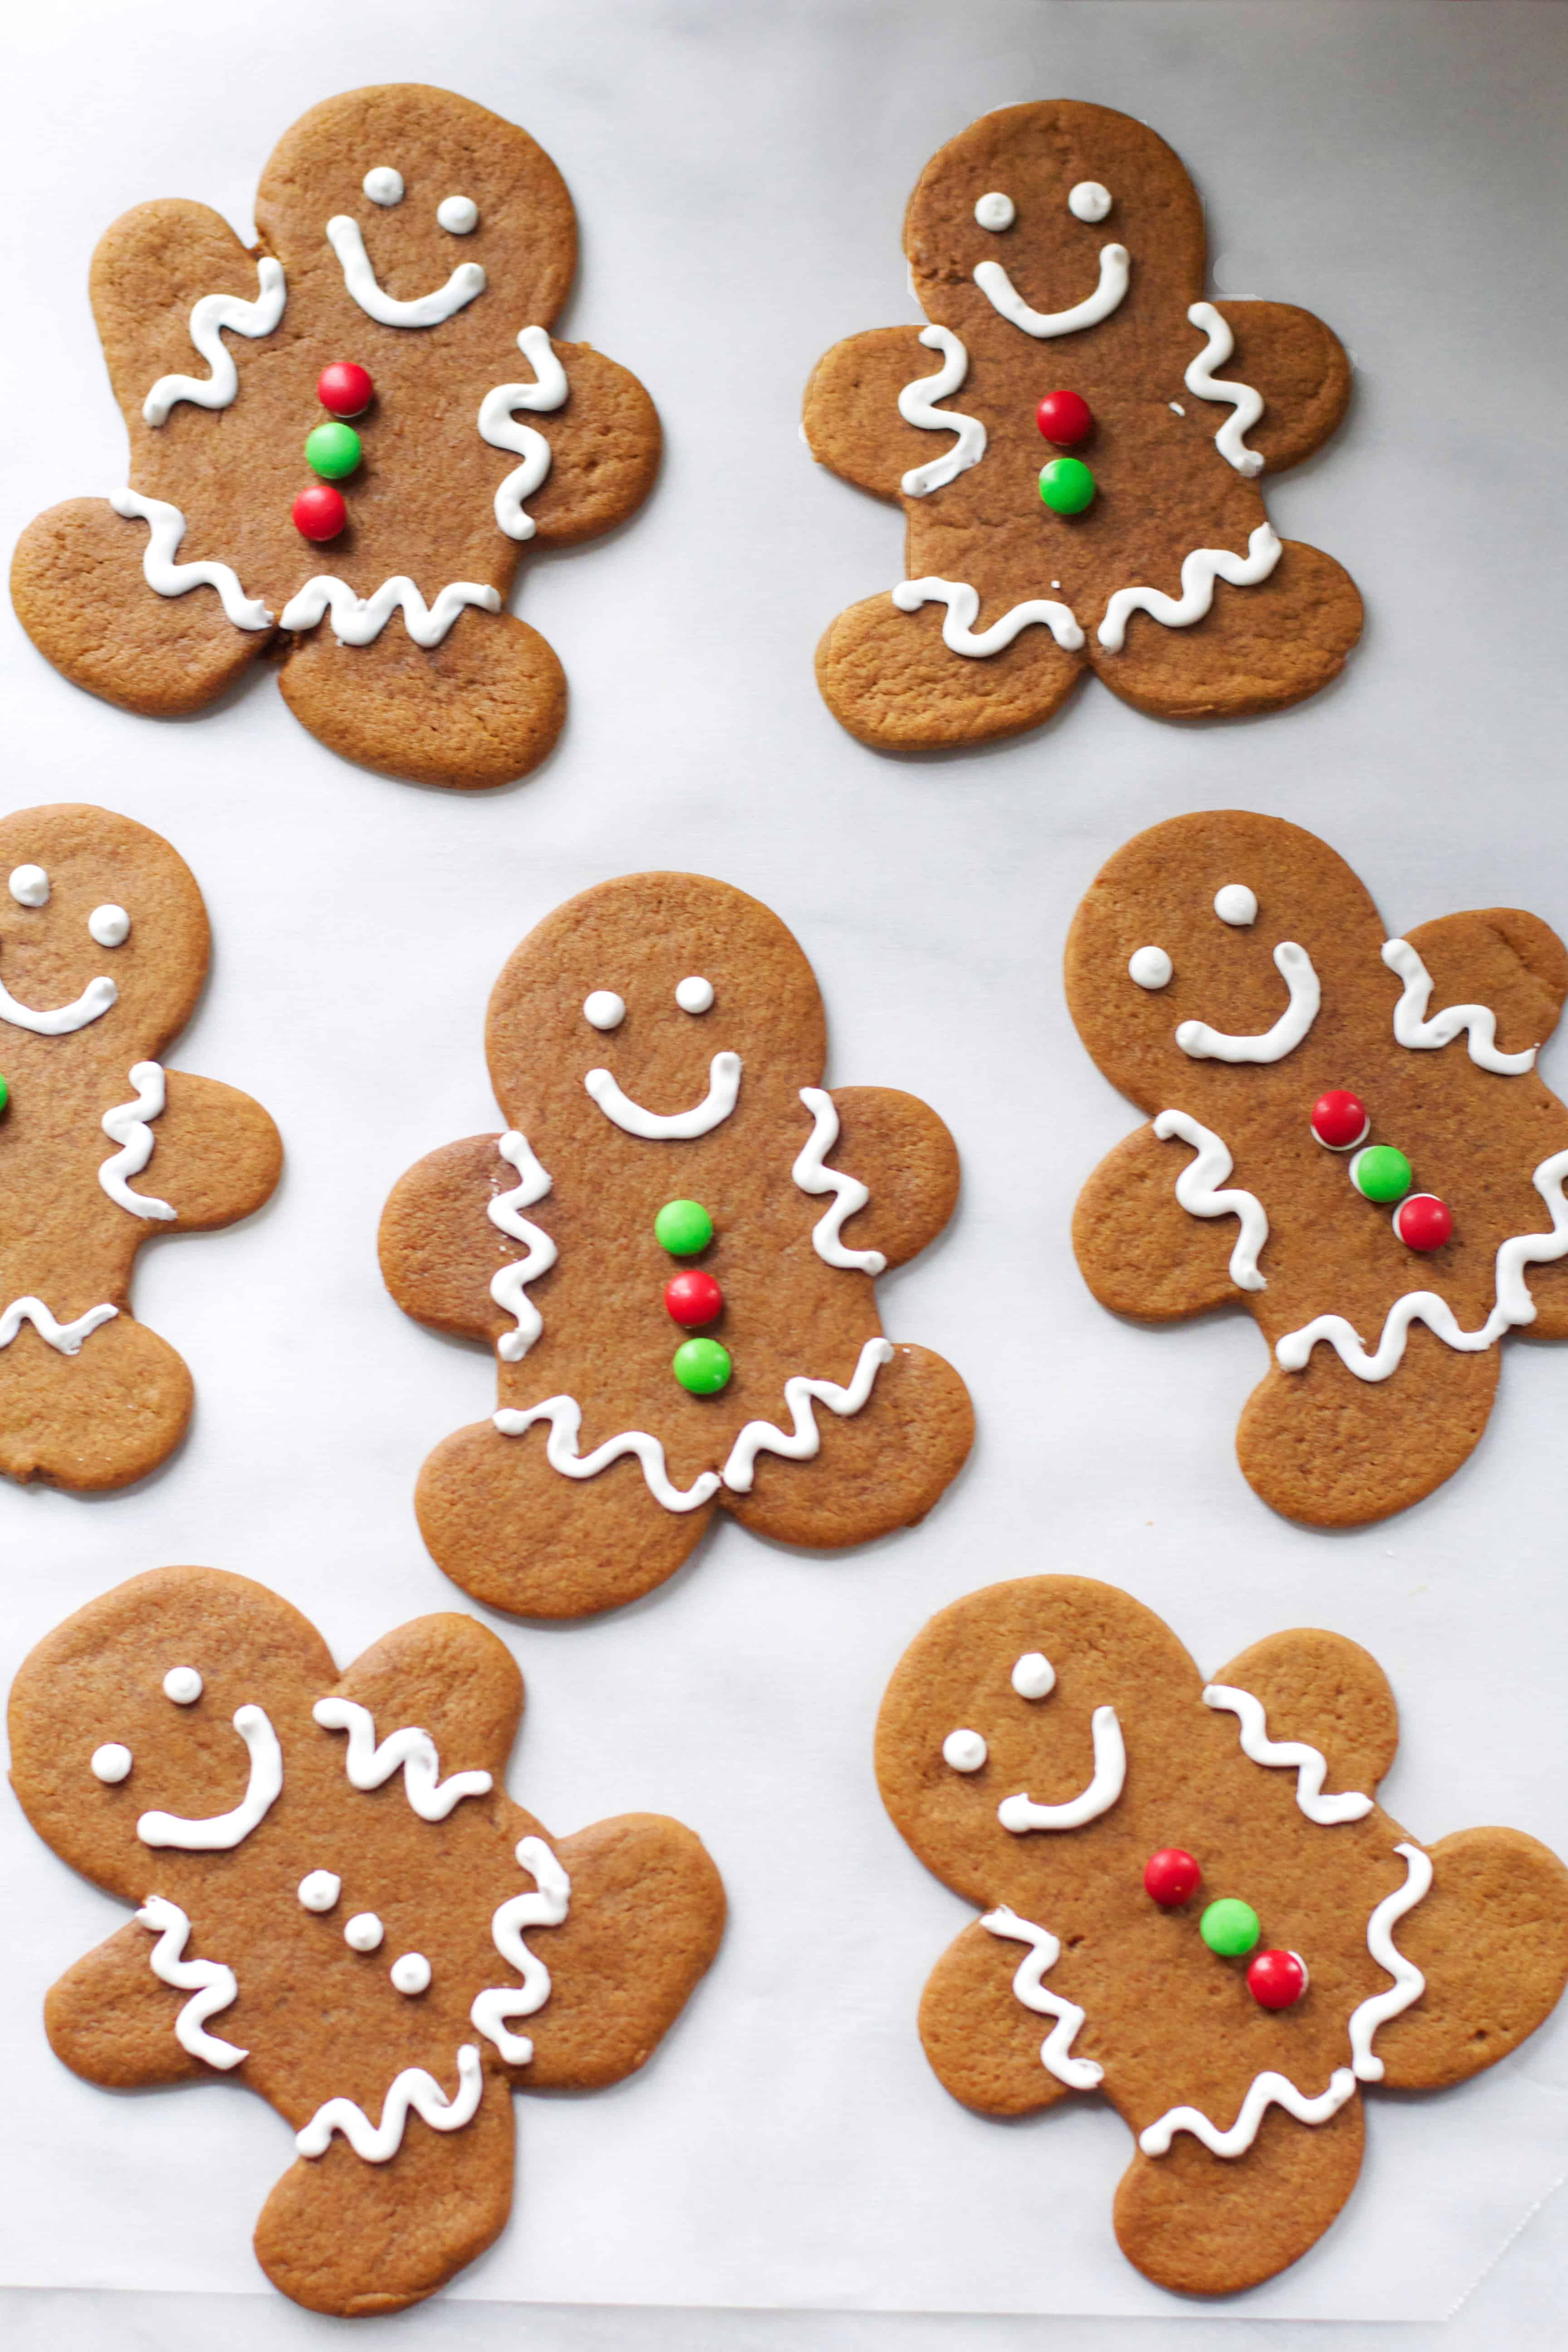 Soft and Chewy Gingerbread Men - The Baker Chick